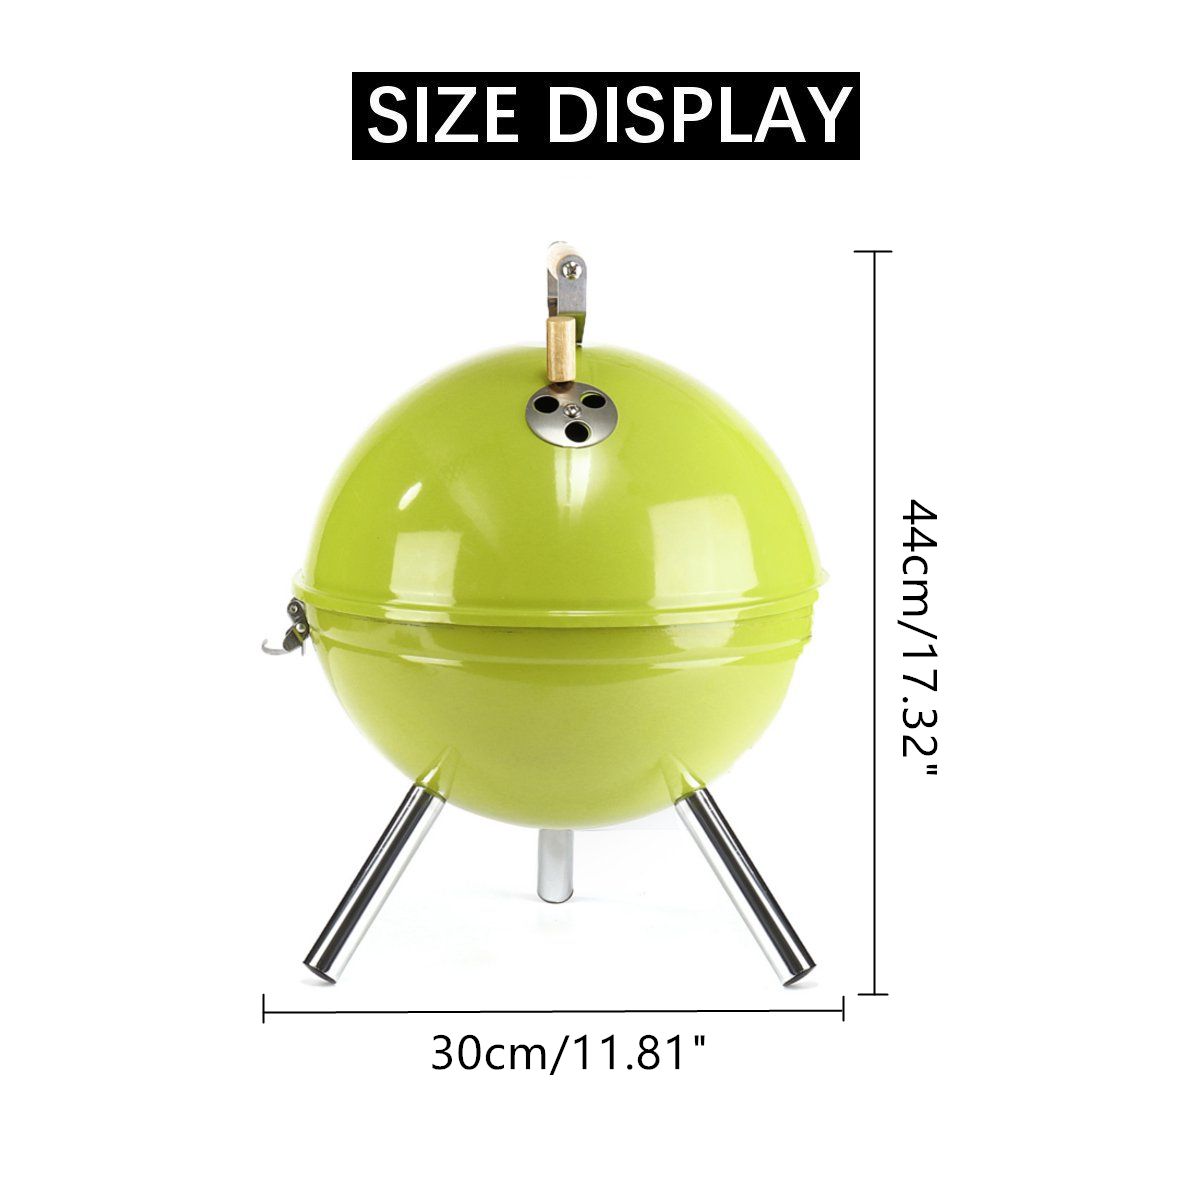 30x44cm-Iron-Oven-BBQ-Grill-Charcoal-Grill-Portable-Party-Accessories-Household-Barbecue-Tools-1563711